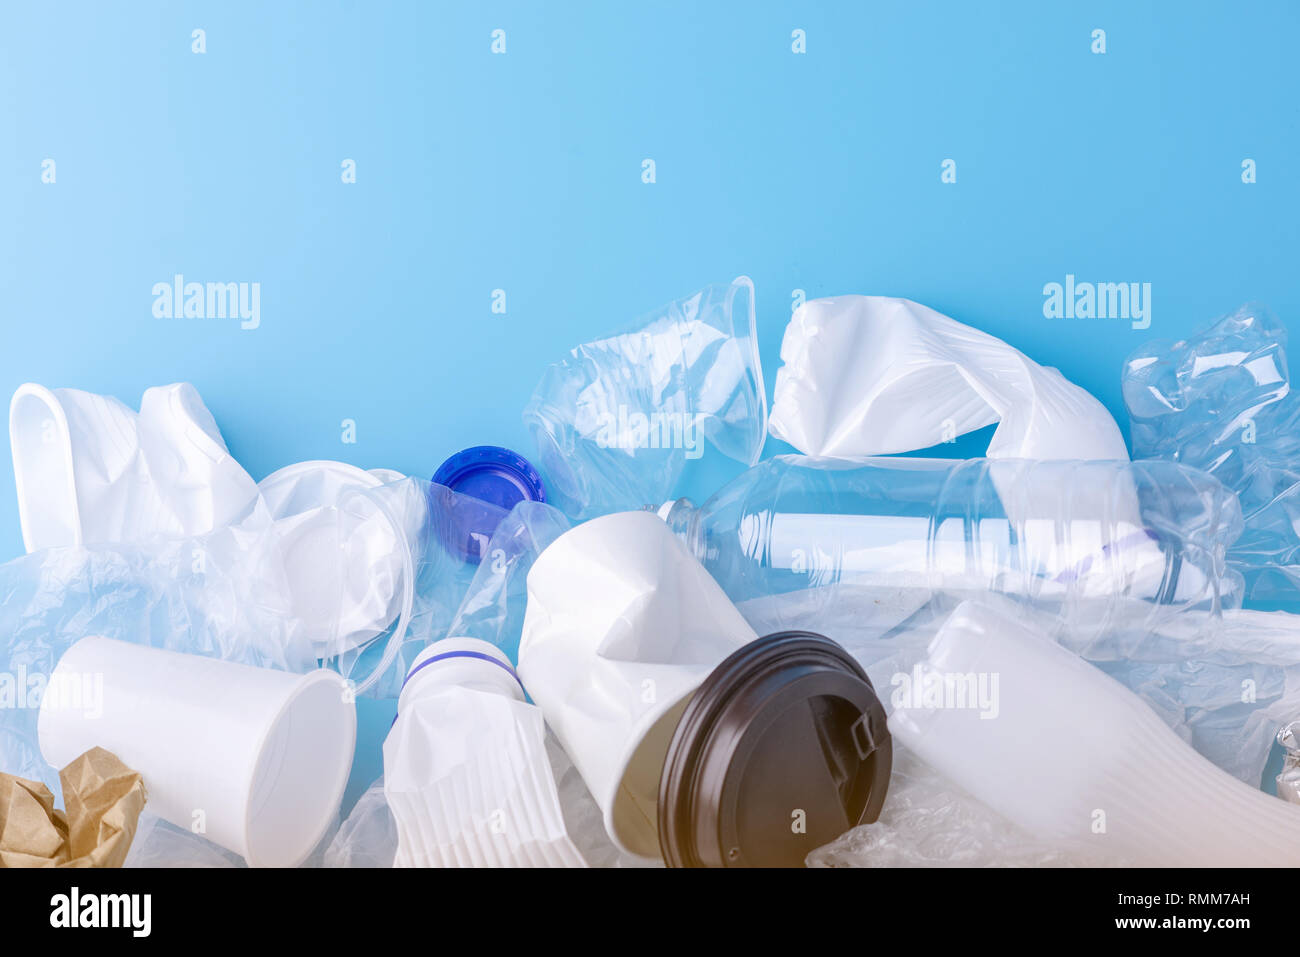 Used unsorted clean garbage in a pile. Bottles, bags and paper on blue background. Concept of environmental pollution and waste sorting Stock Photo